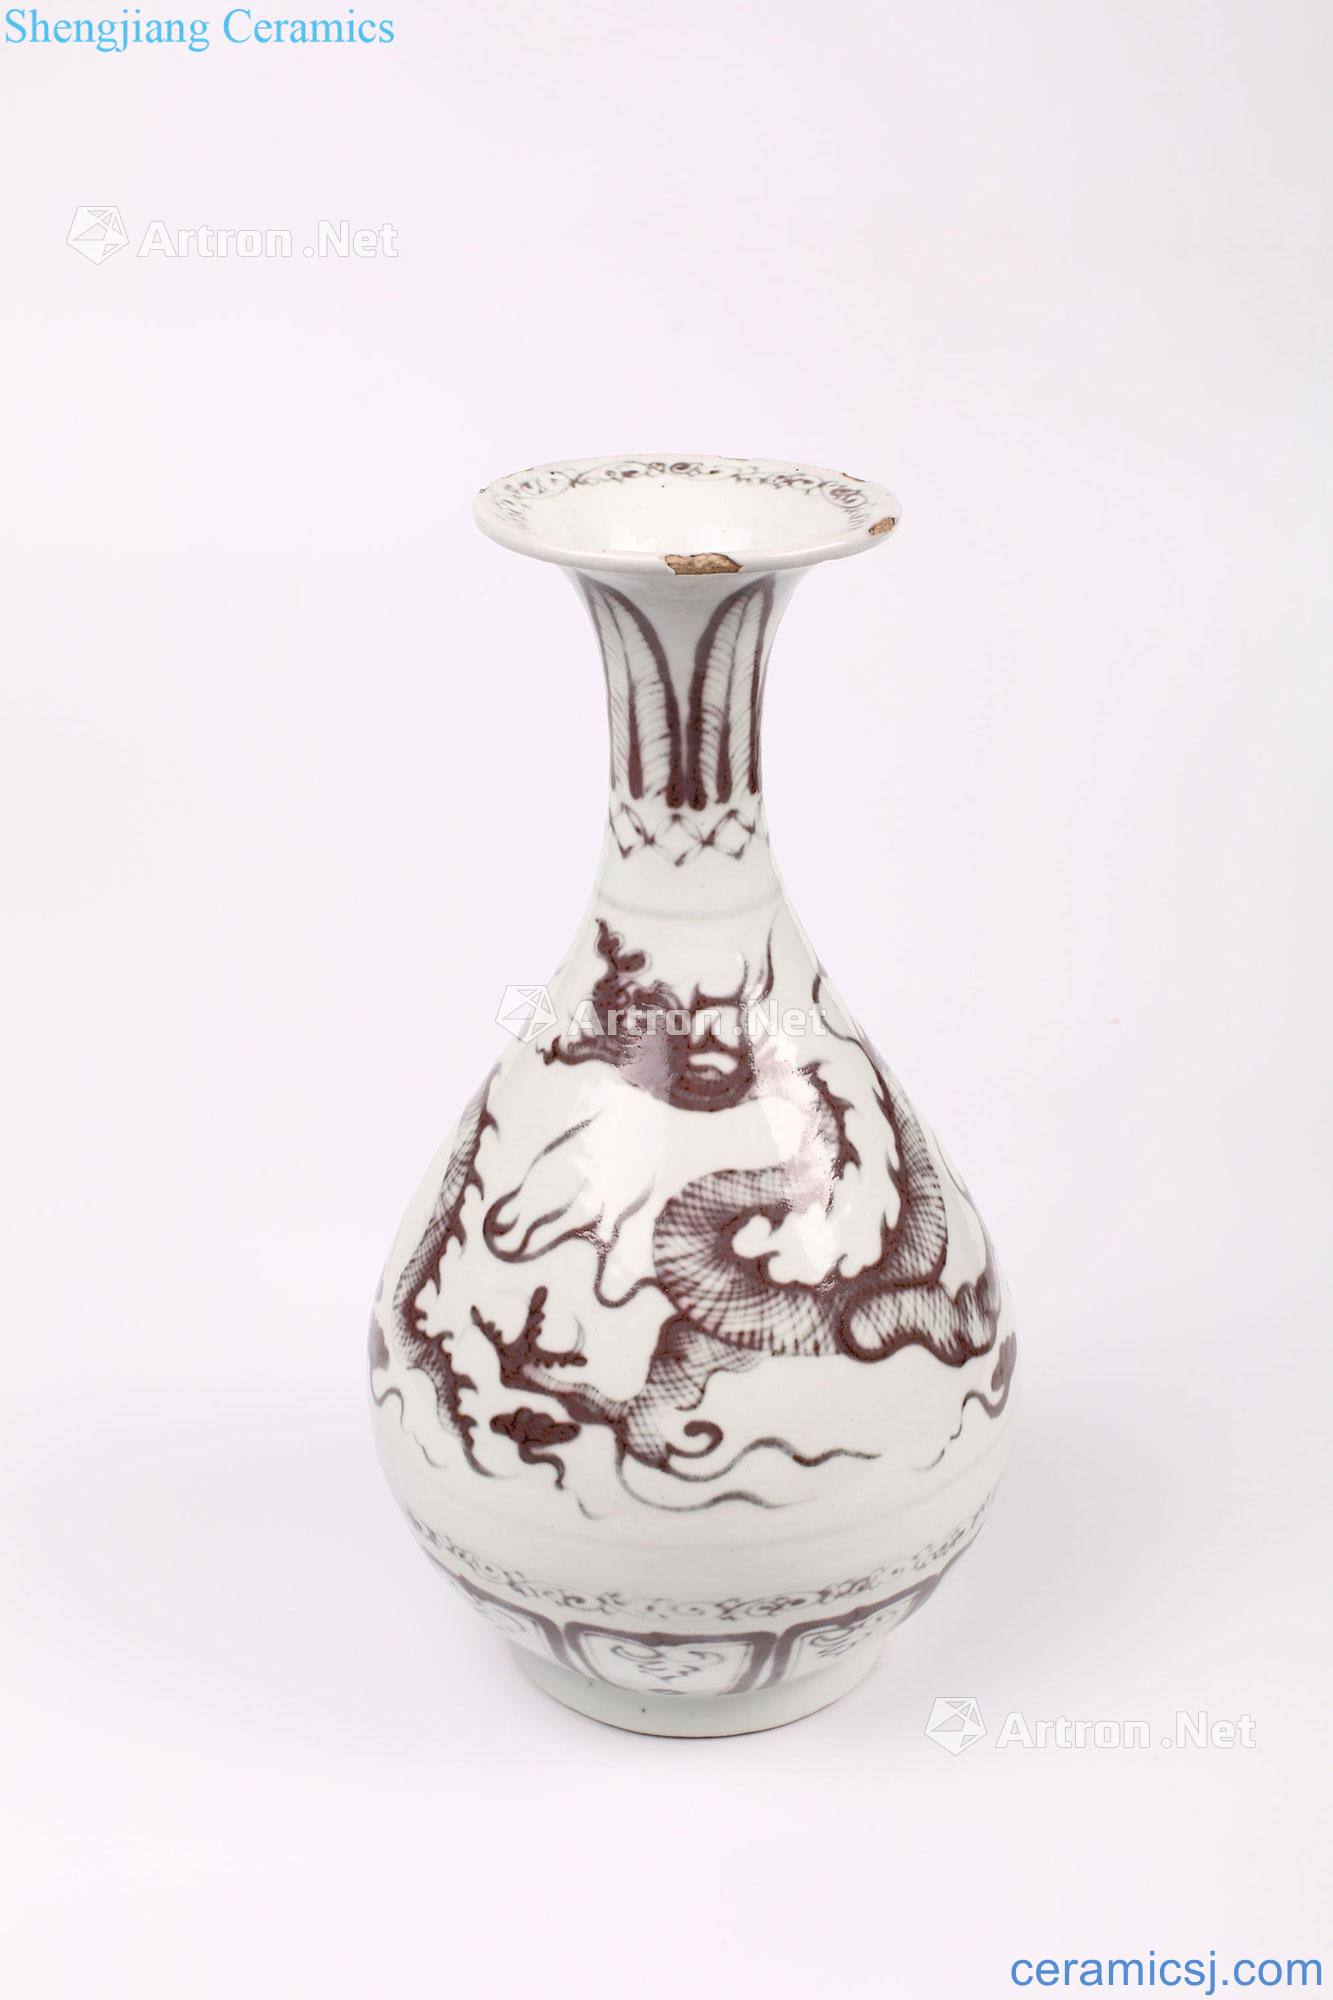 In the 14th century Youligong red dragon grain okho spring bottle